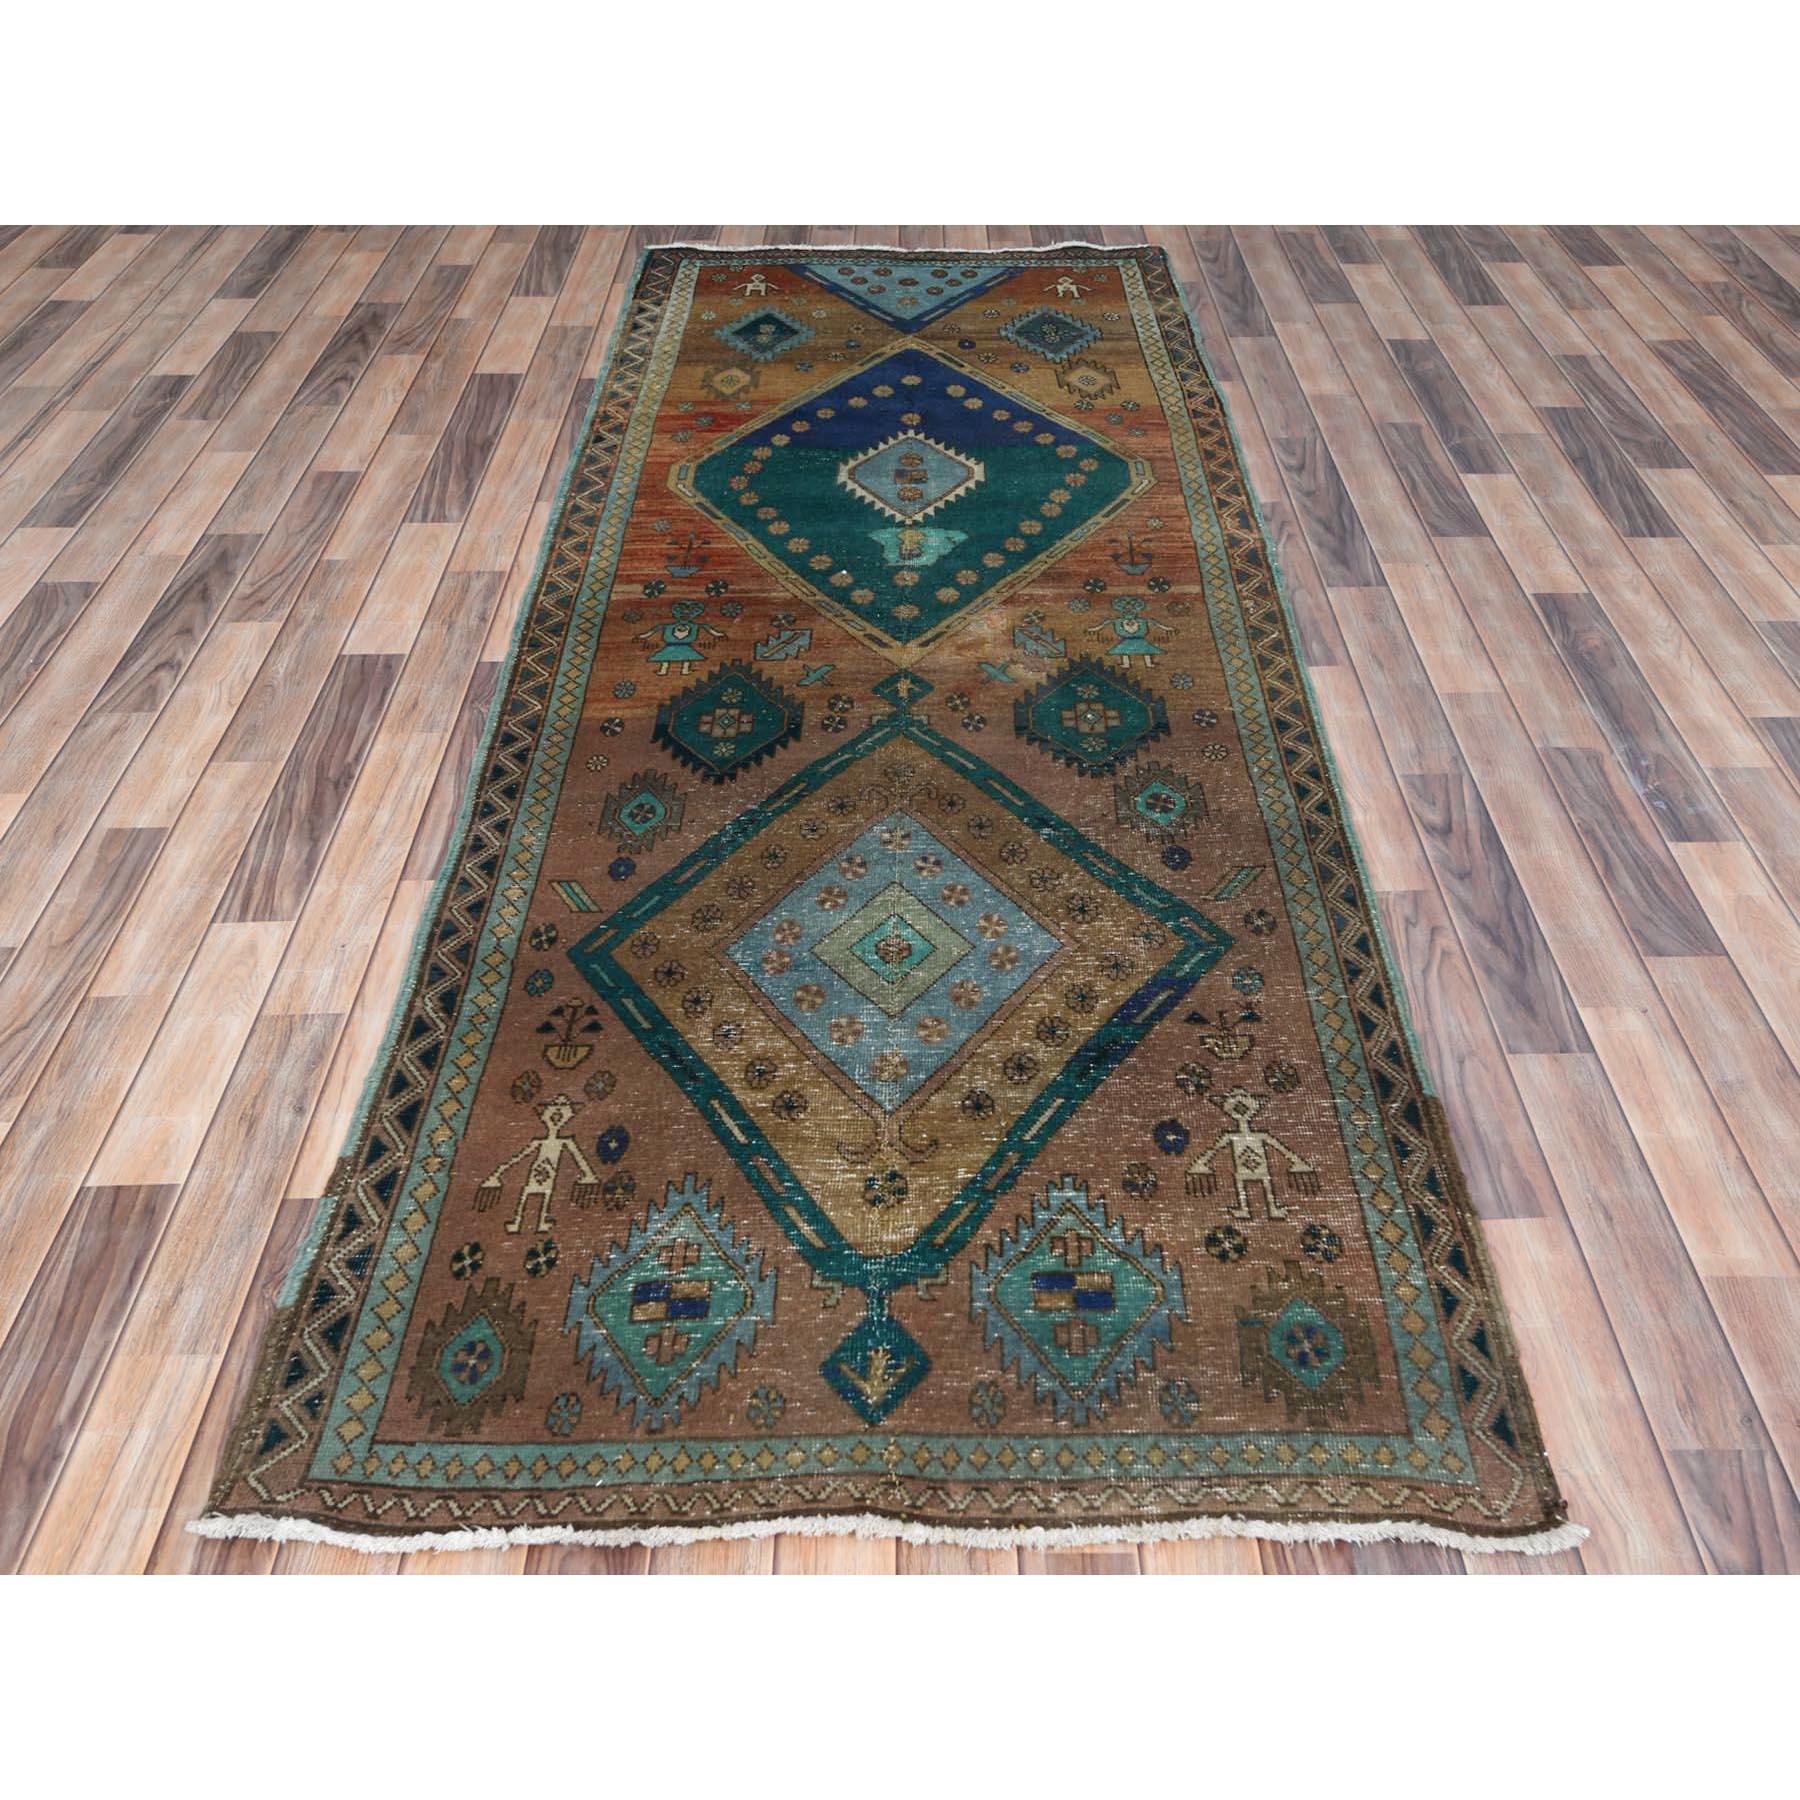 This fabulous hand-knotted carpet has been created and designed for extra strength and durability. This rug has been handcrafted for weeks in the traditional method that is used to make
Exact Rug Size in Feet and Inches : 3'8